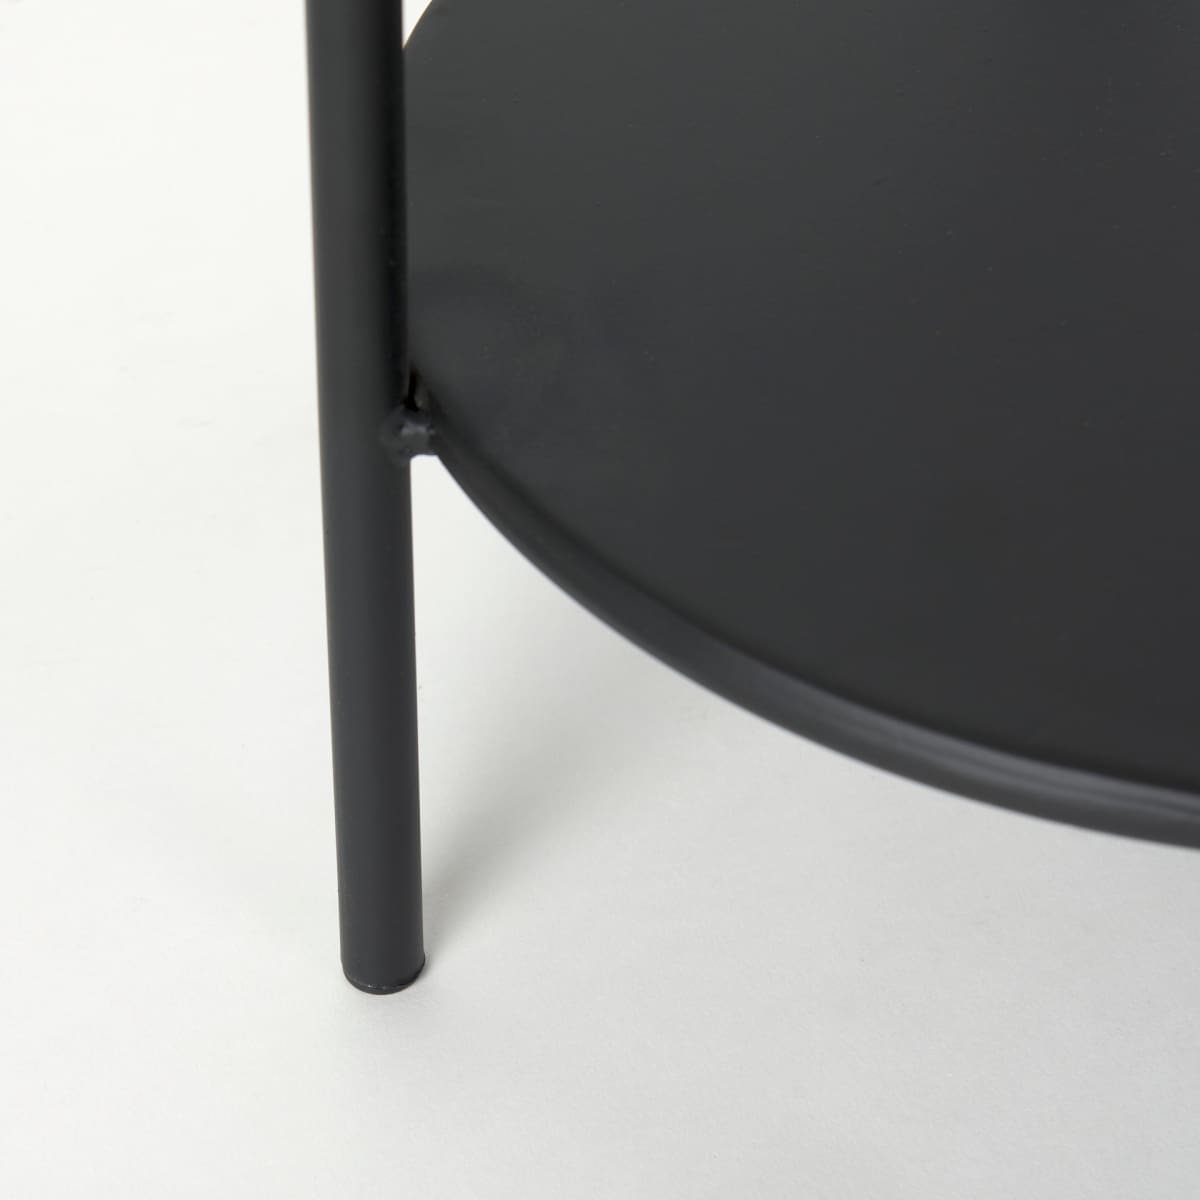 Booker Accent Table Black Metal | Mirror Top - accent-tables